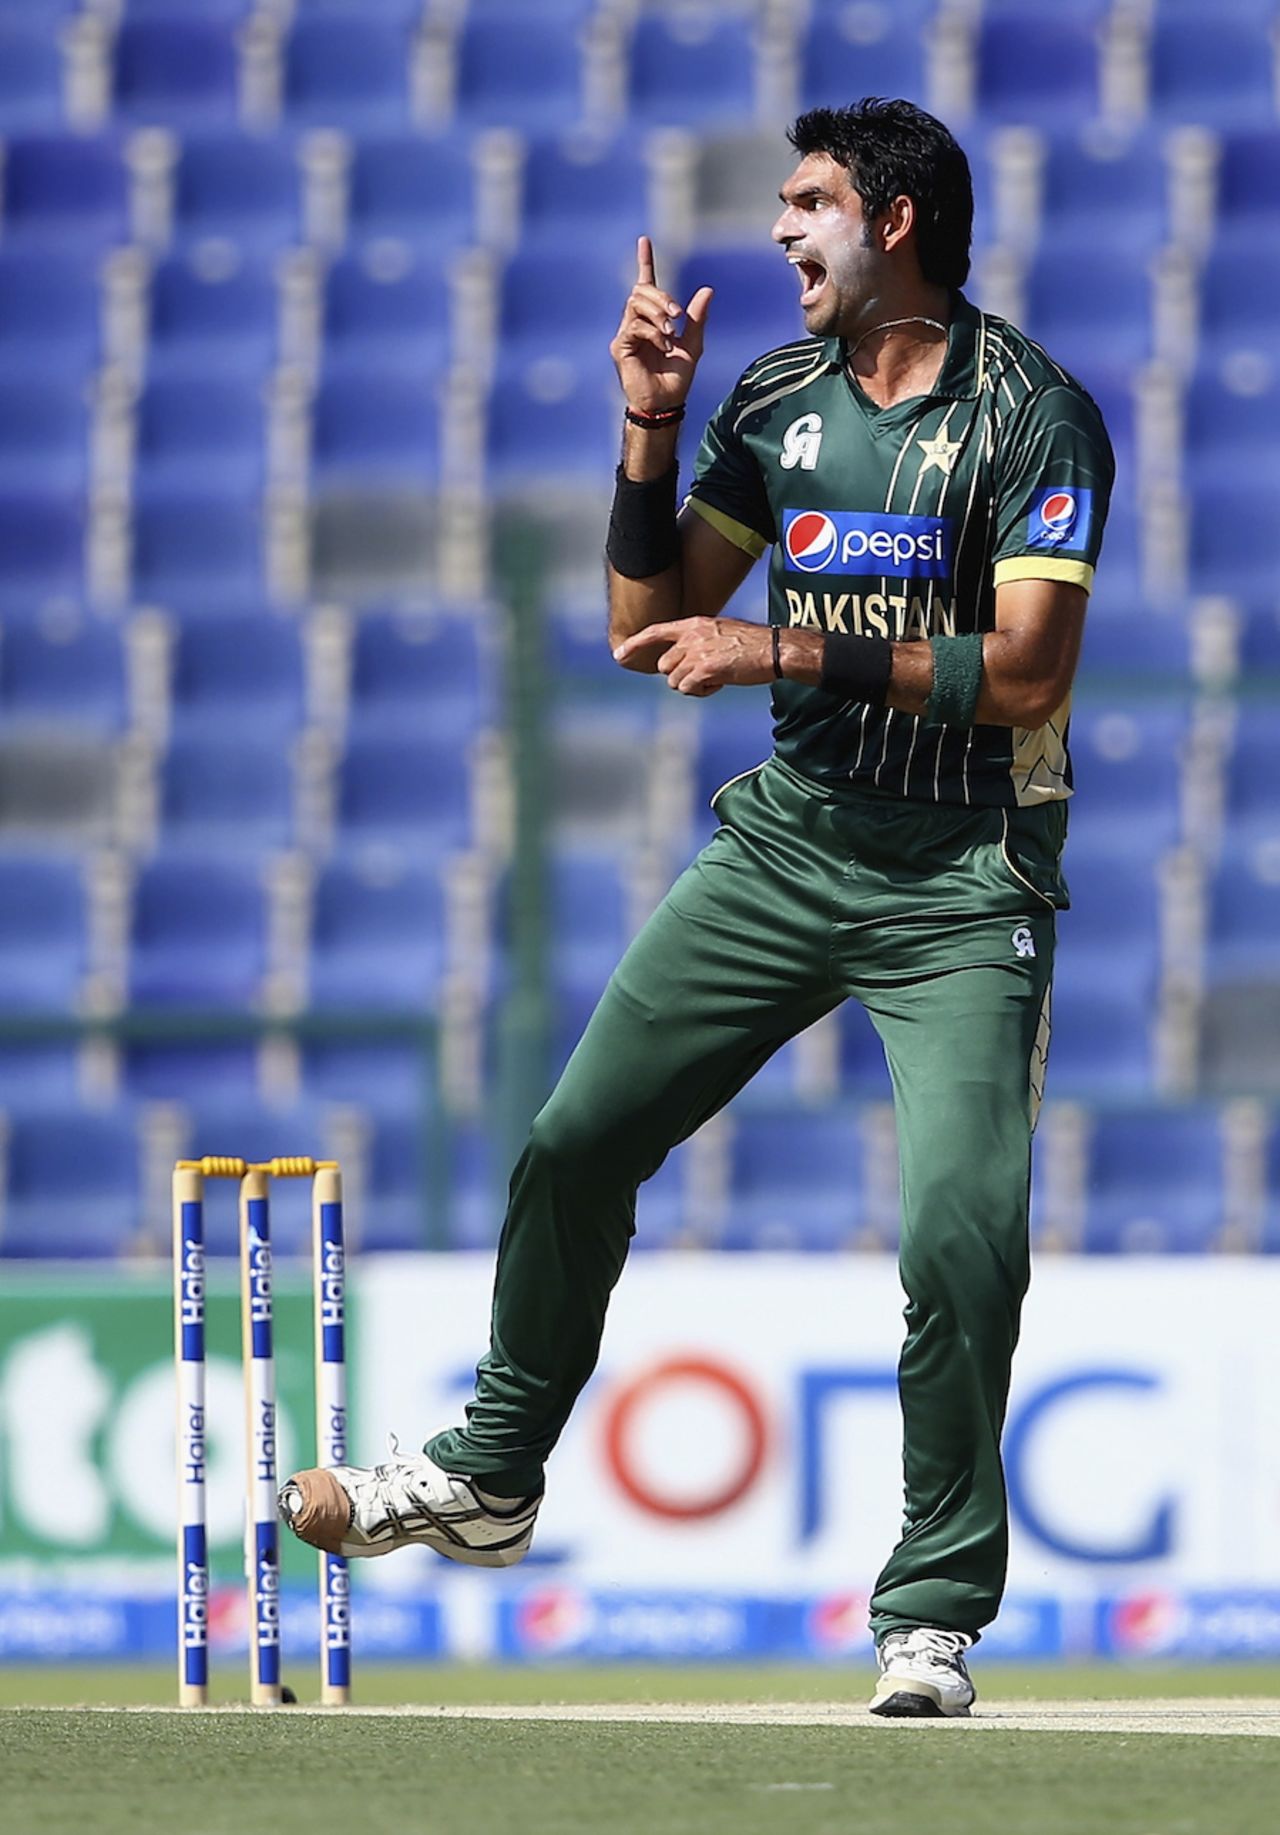 Mohammad Irfan reacts during his opening spell, Pakistan v Australia, 3rd ODI, Abu Dhabi, October 12, 2014